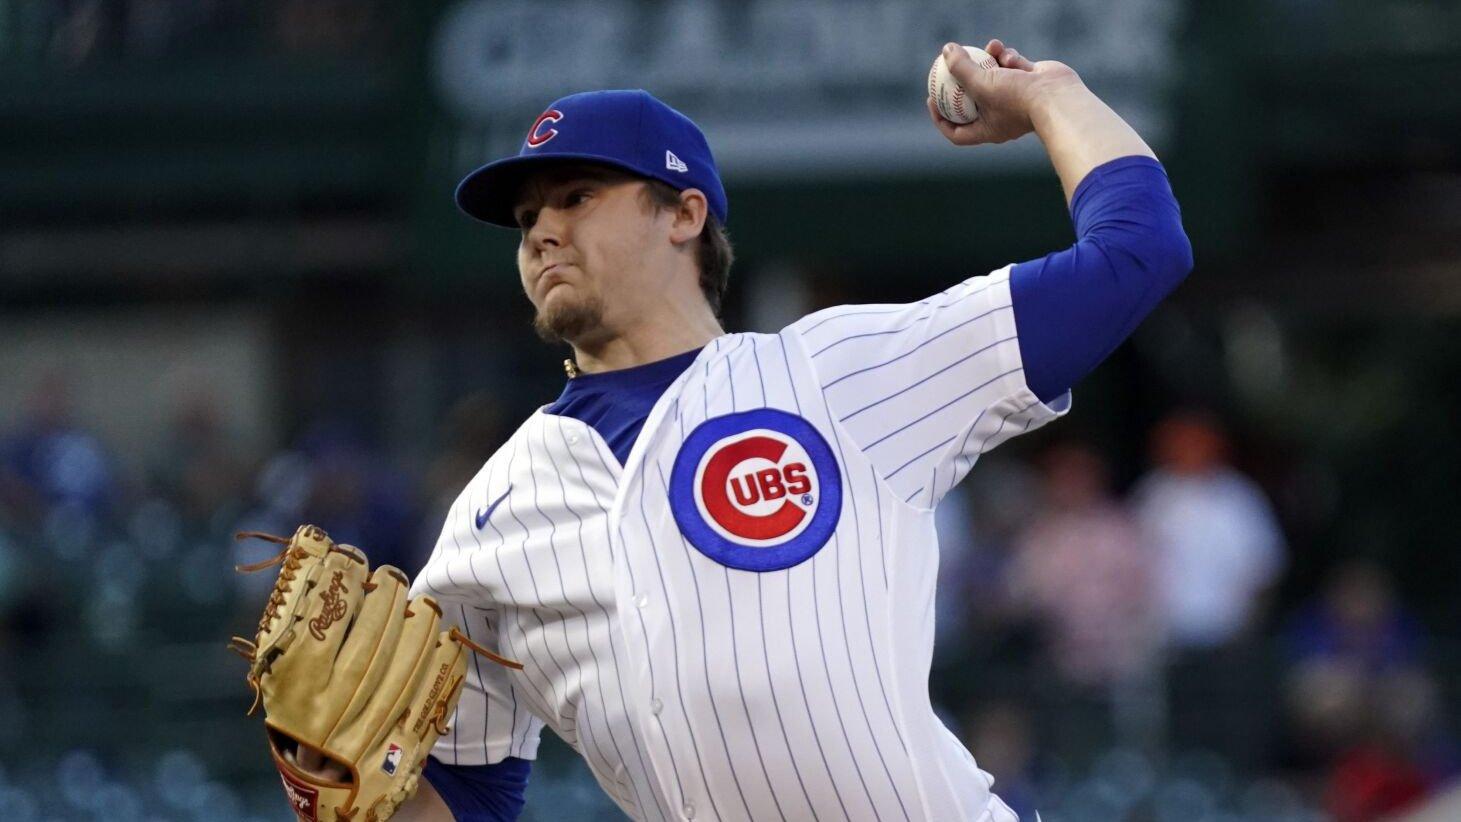 Cubs vs. Rangers MLB Opening Day prediction